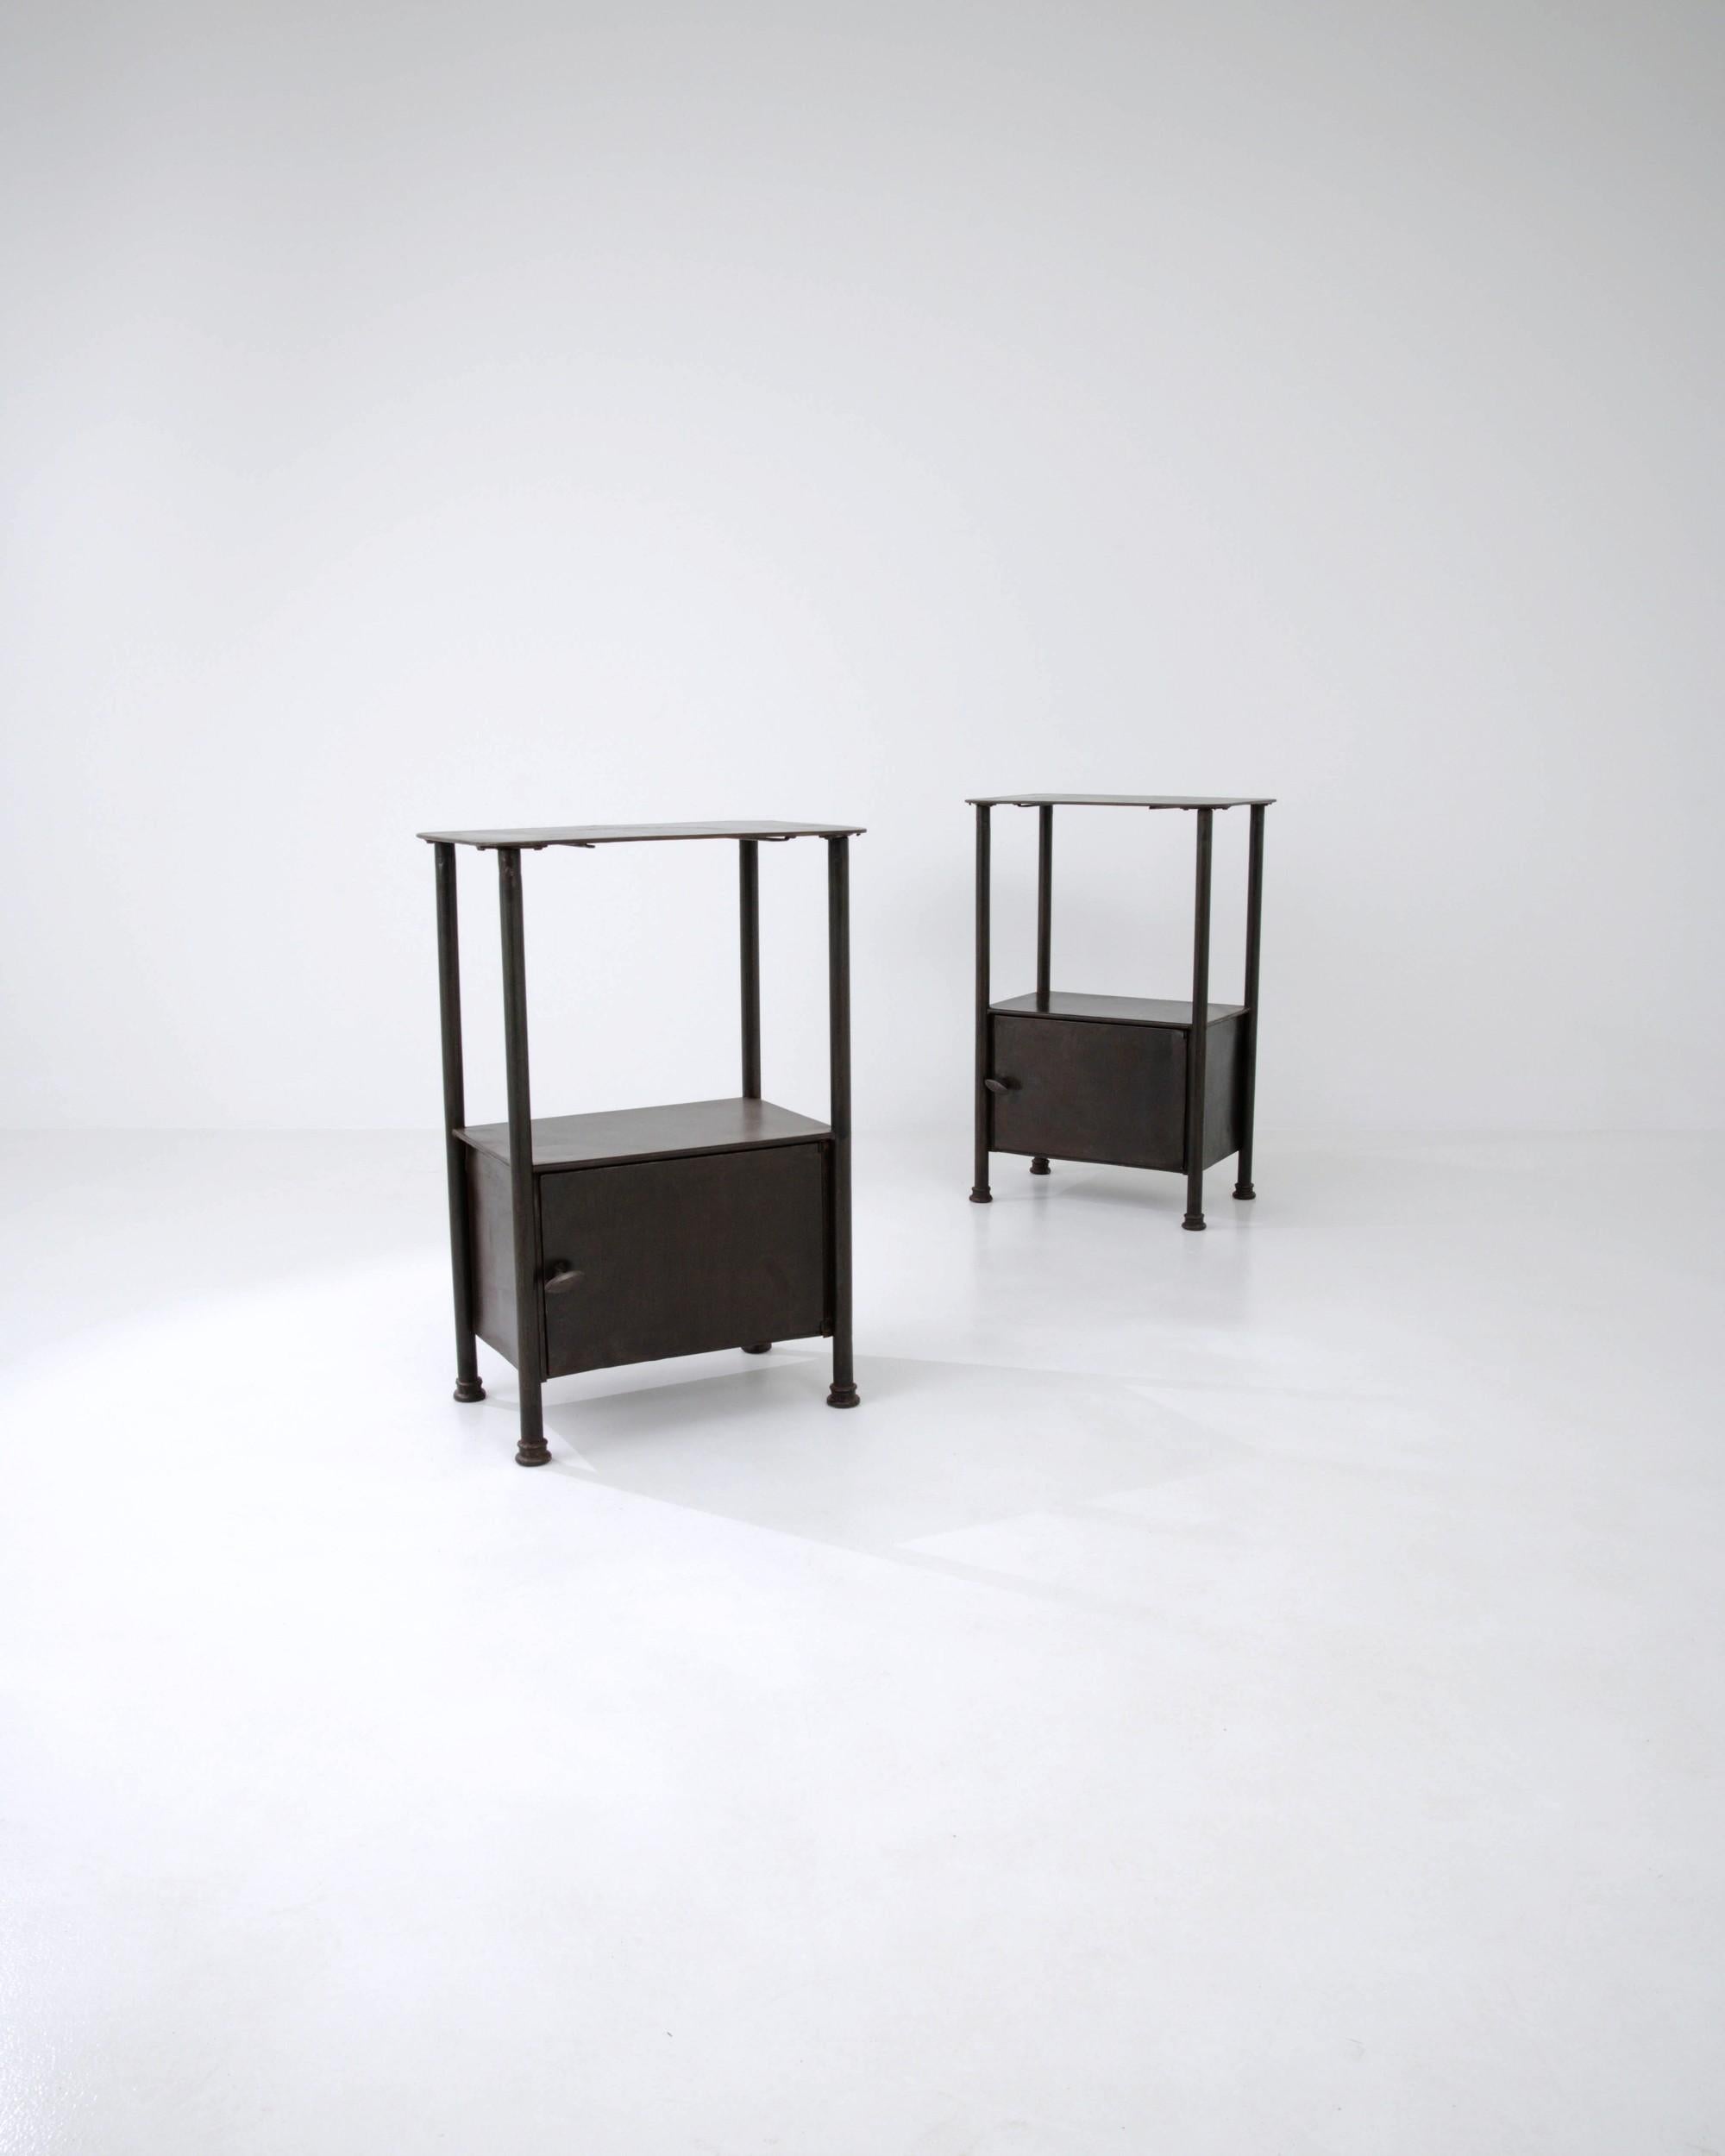 Combining a bold form with a dark patina, this pair of vintage metal bedside tables make an attractive Industrial accent. Built in France in the early 20th century, a low cupboard is framed by the tall pillars of the legs, which rise to support an